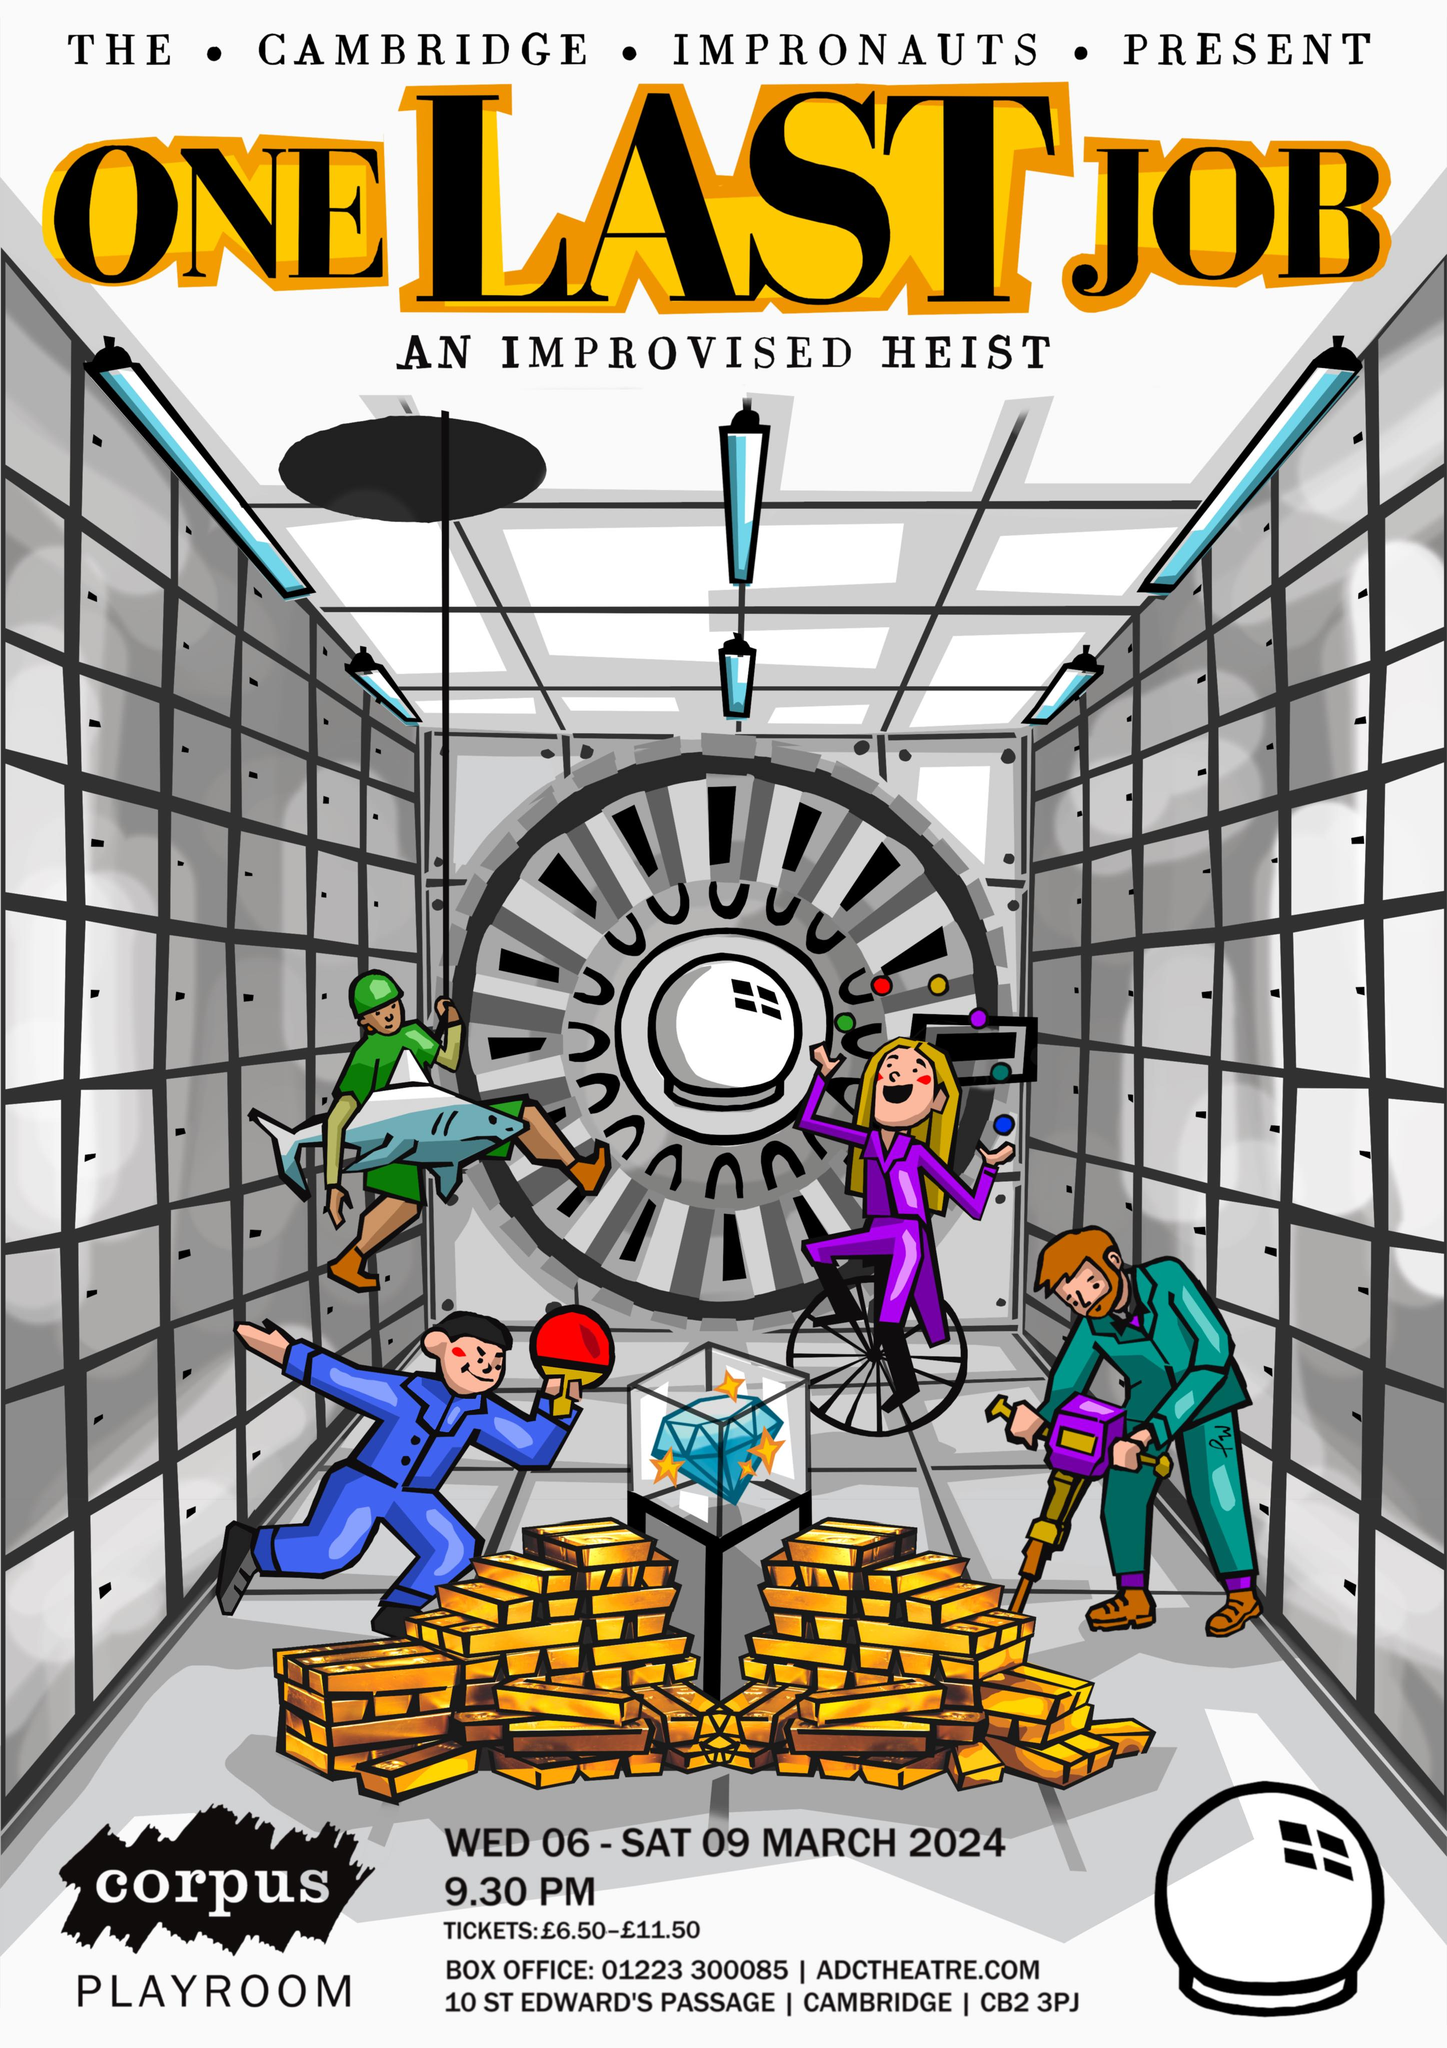 Poster for One Last Job: An improvised Heist. 4 improvisers, dressed in colourful outfits, have broken into a vault full of diamonds and gold. They are, in order: holding a shark, juggling, playing ping pong, and using a jackhammer.